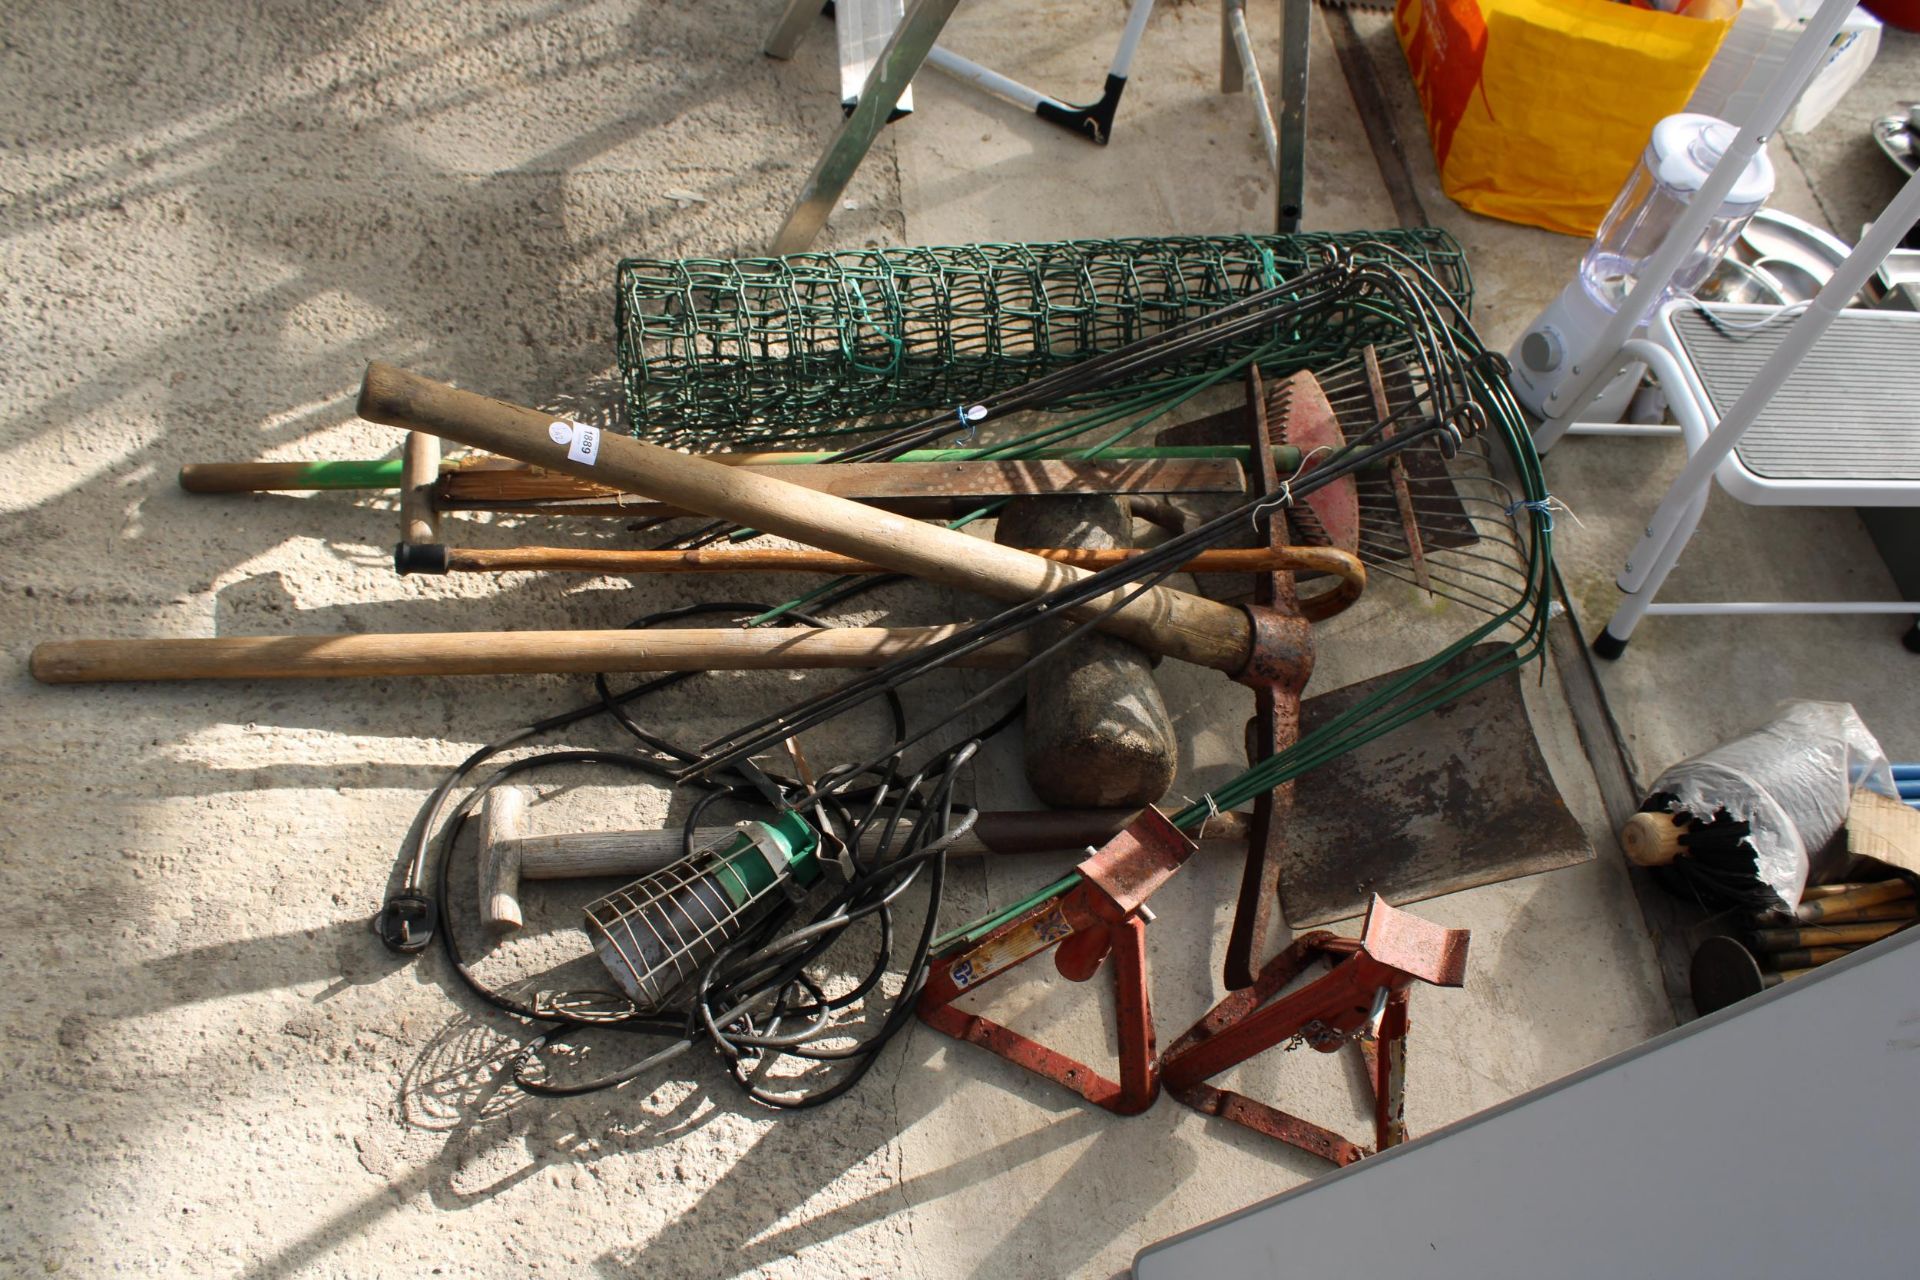 AN ASSORTMENT OF GARDEN TOOLS TO INCLUDE TWO SHOVELS, A LARGE RUBBER MALLET AND A PICK AXE ETC - Image 2 of 2